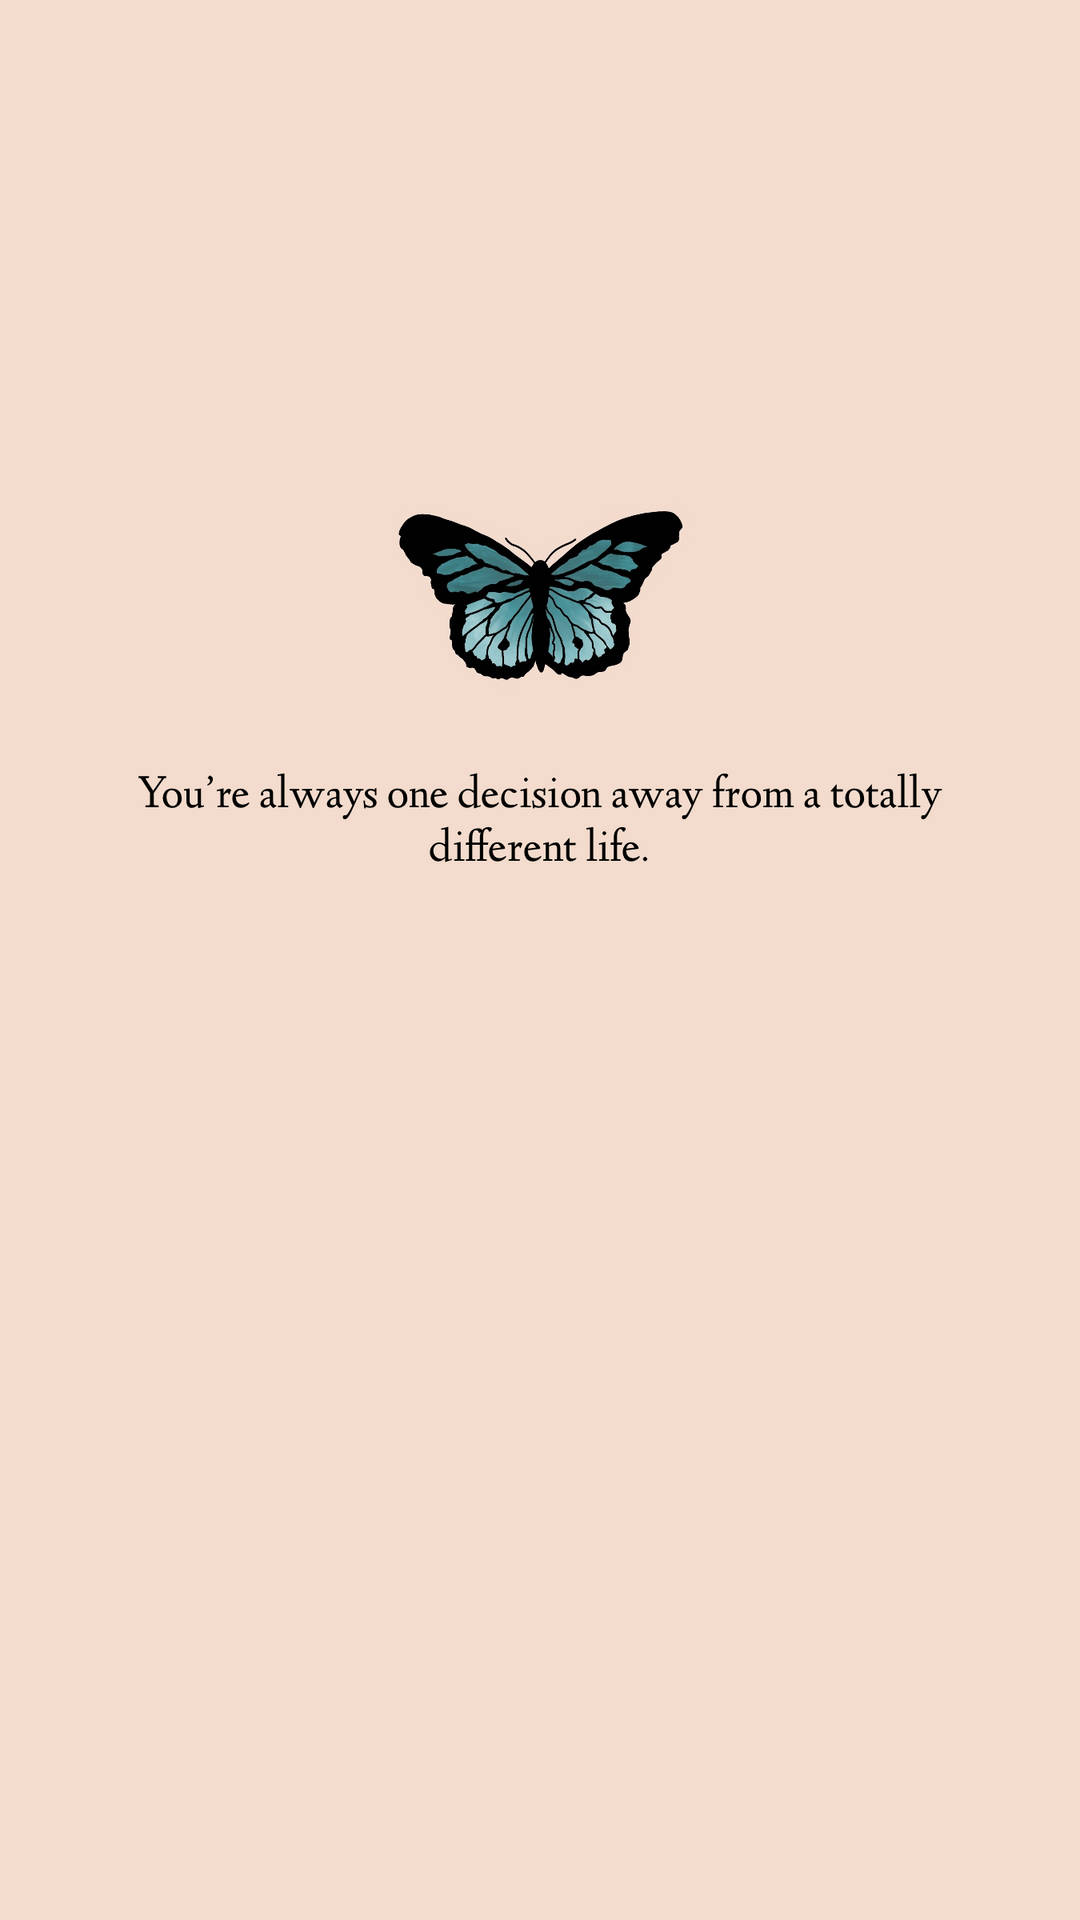 Motivational Quote on Decisions Wallpaper